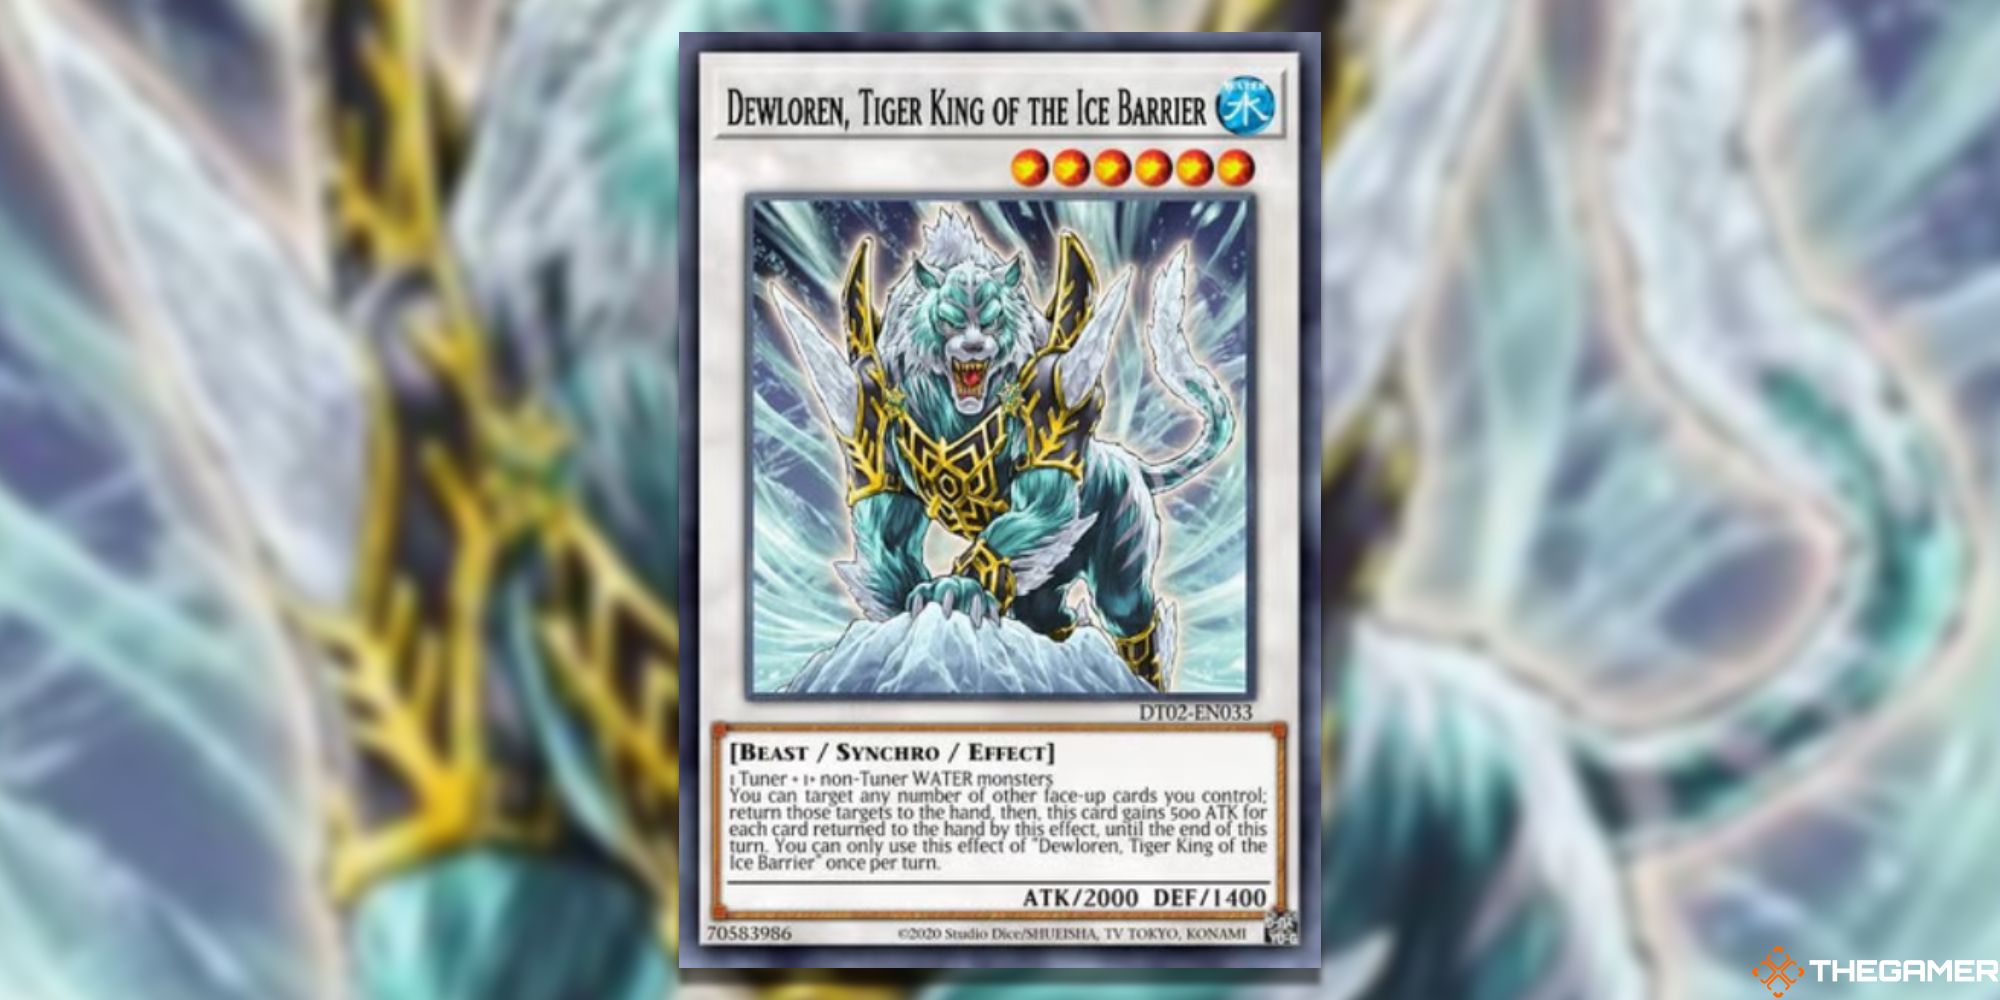 Yu-Gi-Oh! Dewloren, Tiger King Of The Ice Barrier on blurred background